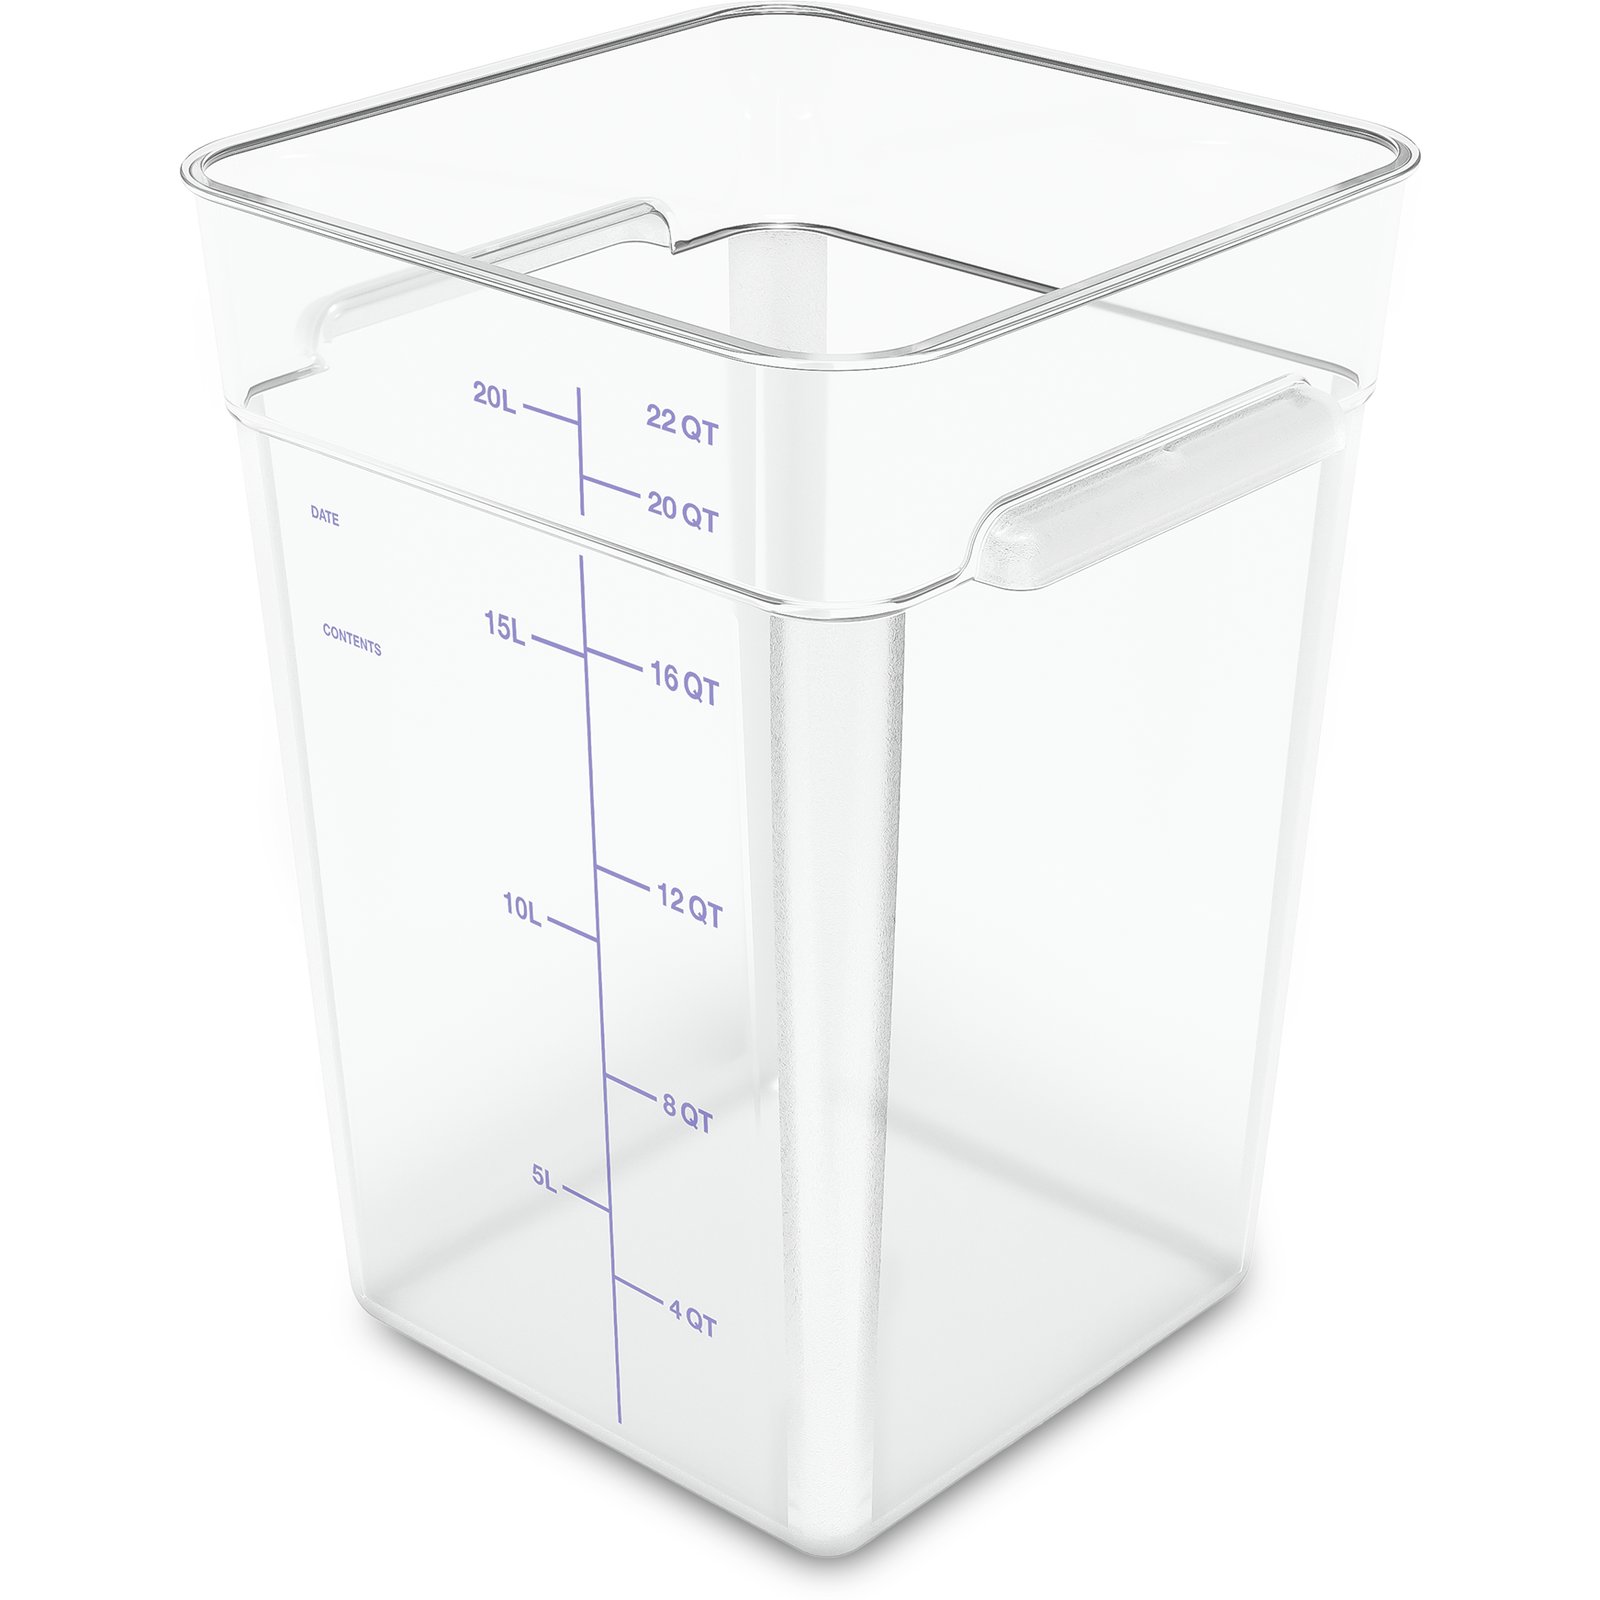  Hakka 2 Qt Commercial Grade Square Food Storage Containers With  Lids,Polycarbonate,Clear - Case of 5: Home & Kitchen